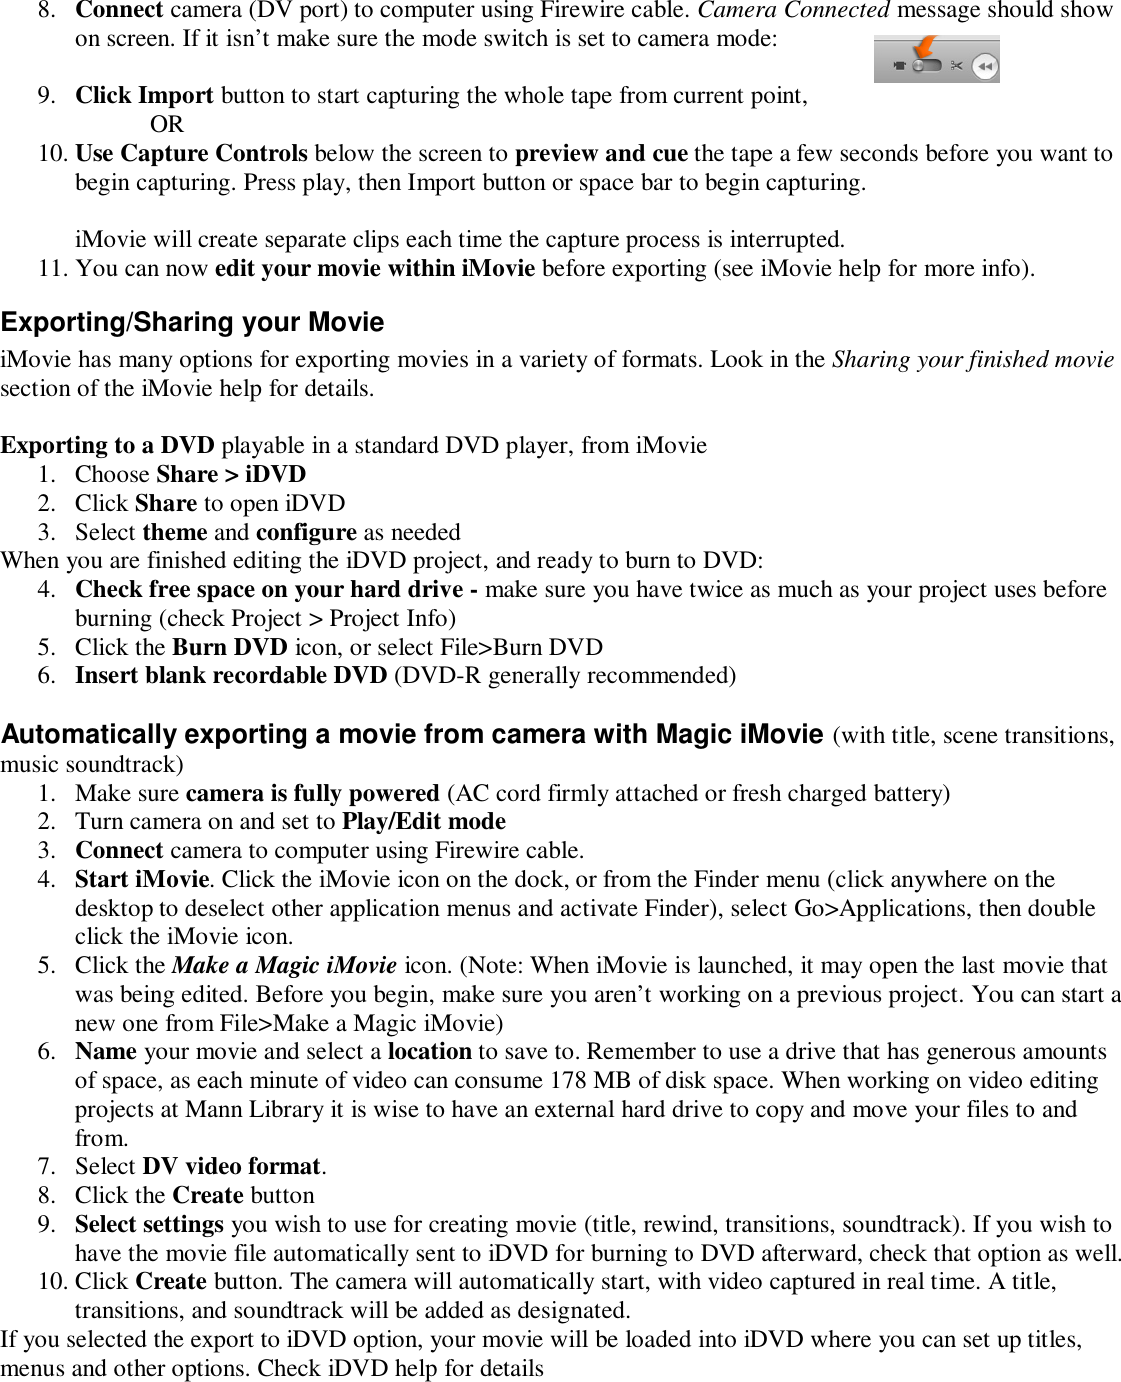 Page 3 of 6 - Sony Sony-Dcr-Hc21-Users-Manual- Transferring Footage From The DCR-HC21  Sony-dcr-hc21-users-manual